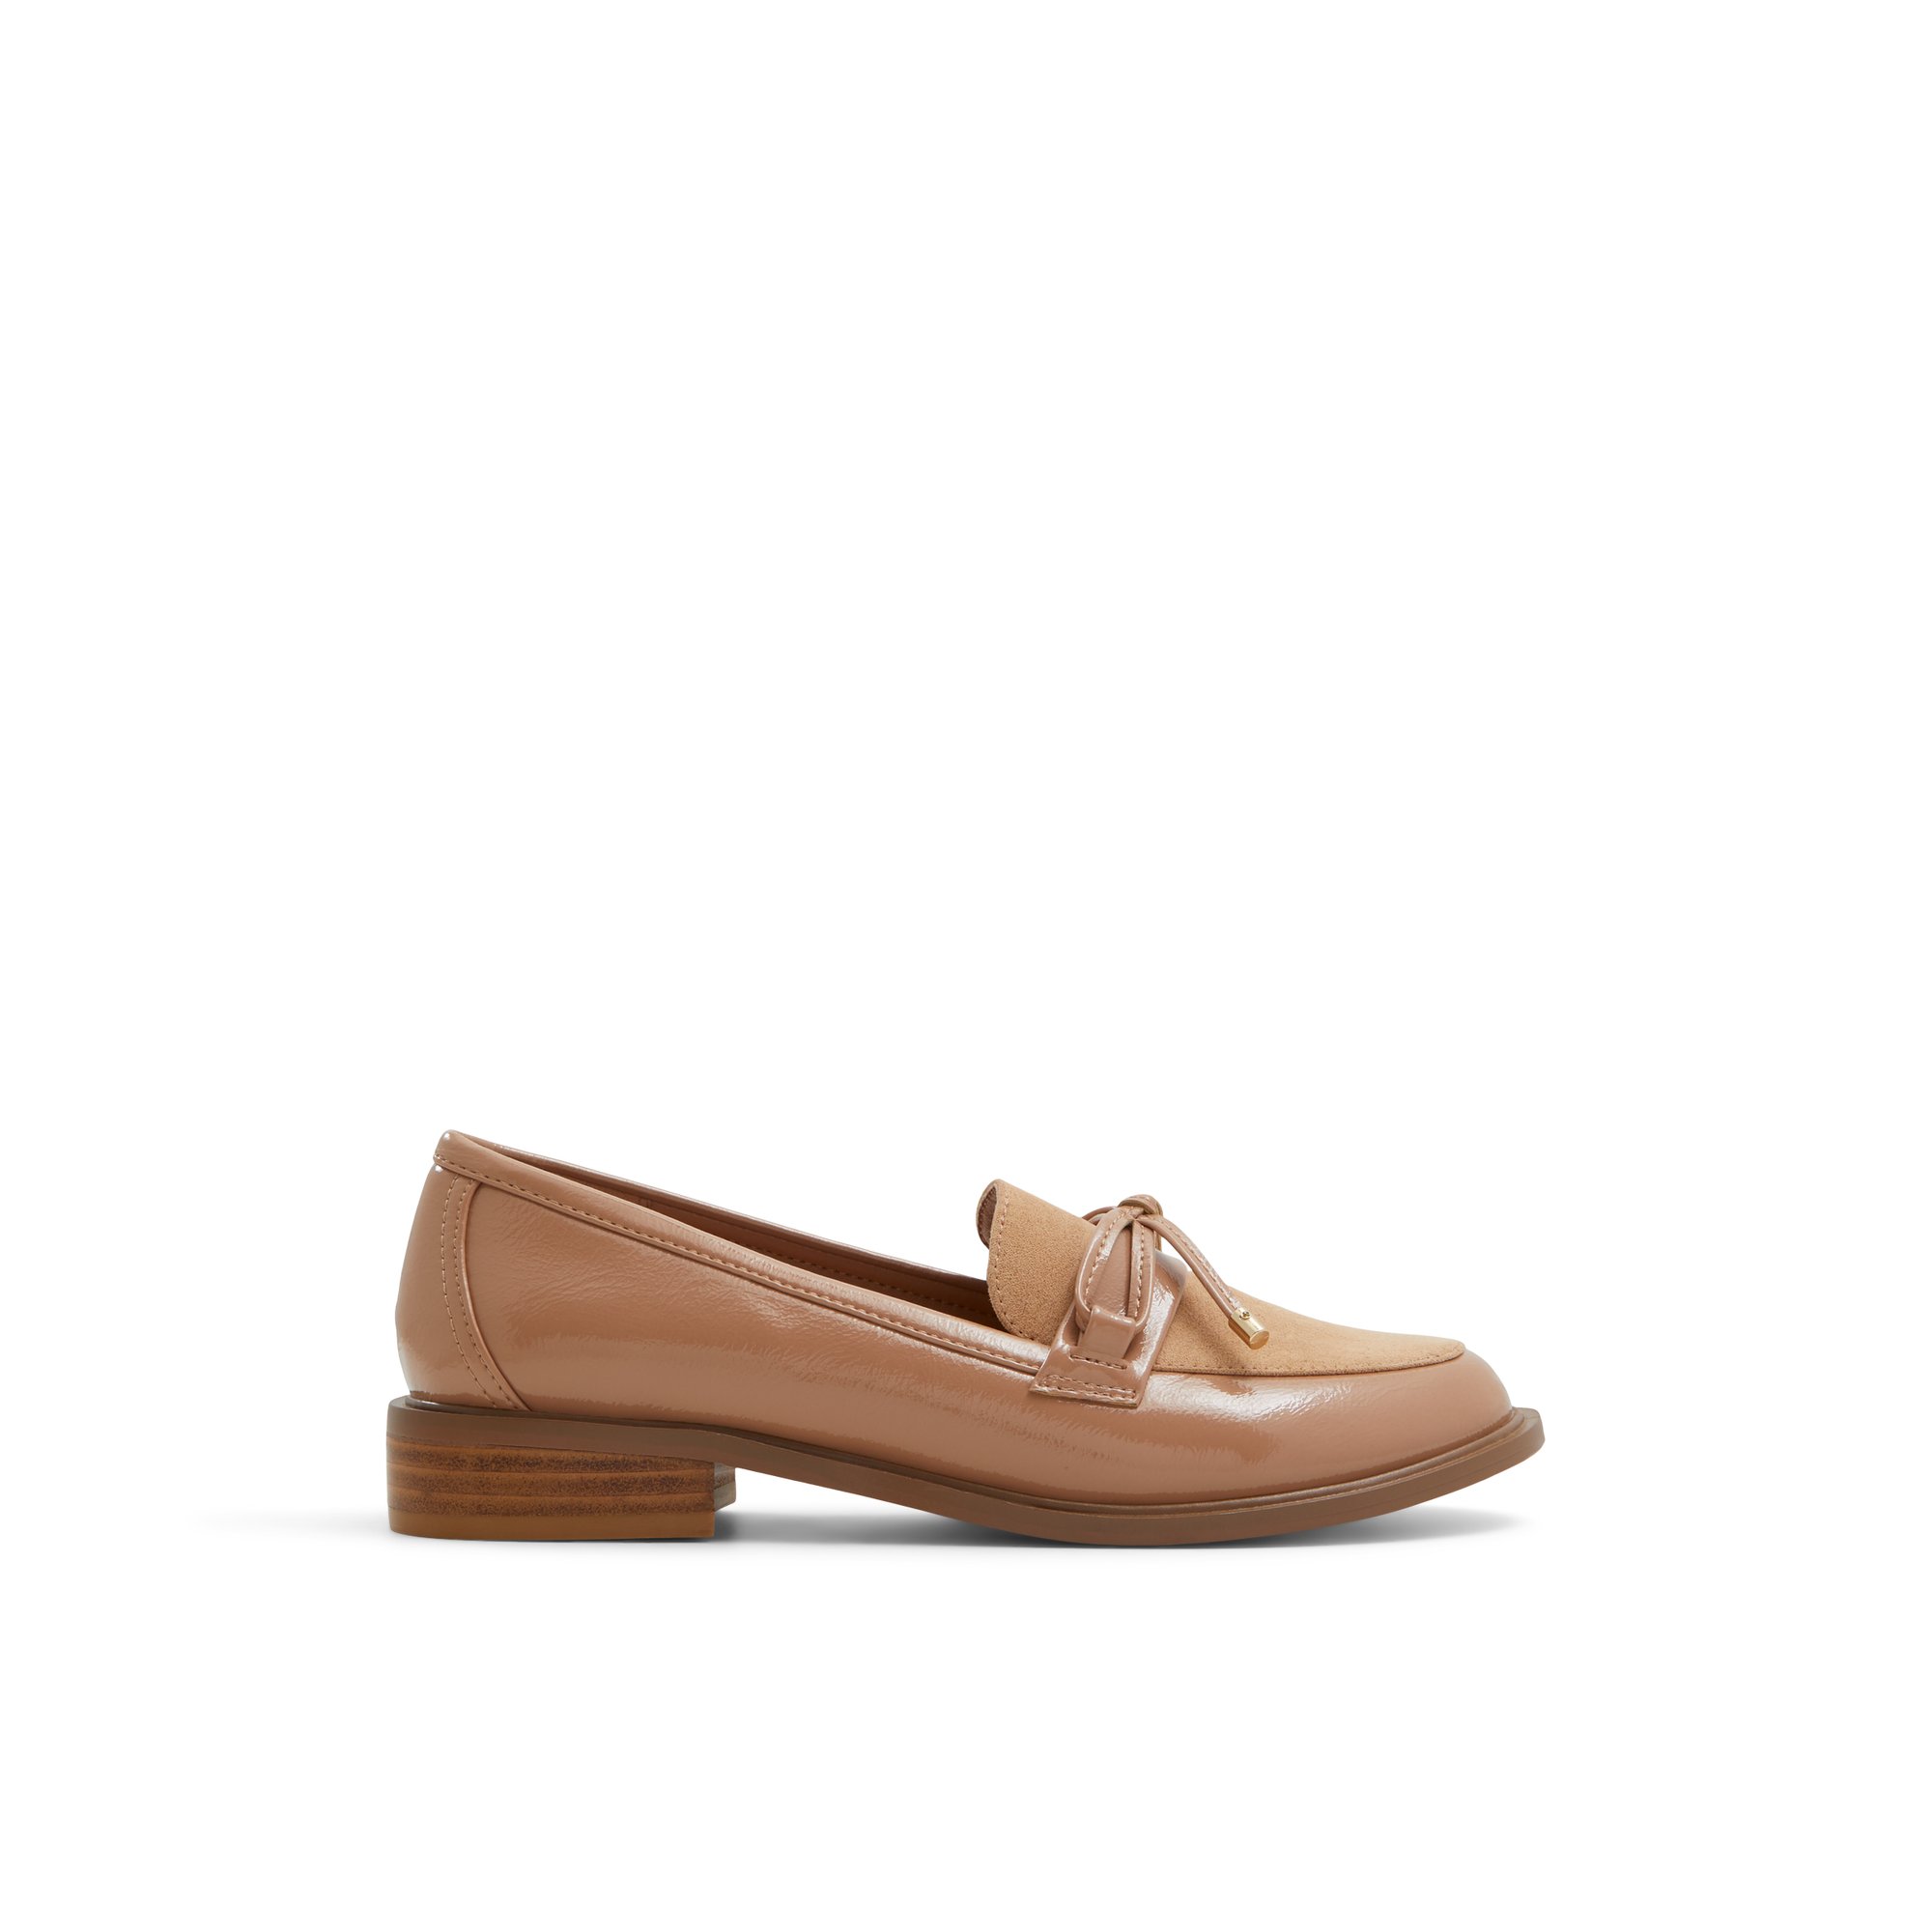 K Studio Jas - Women's Footwear Shoes Flats Oxfords and Loafers